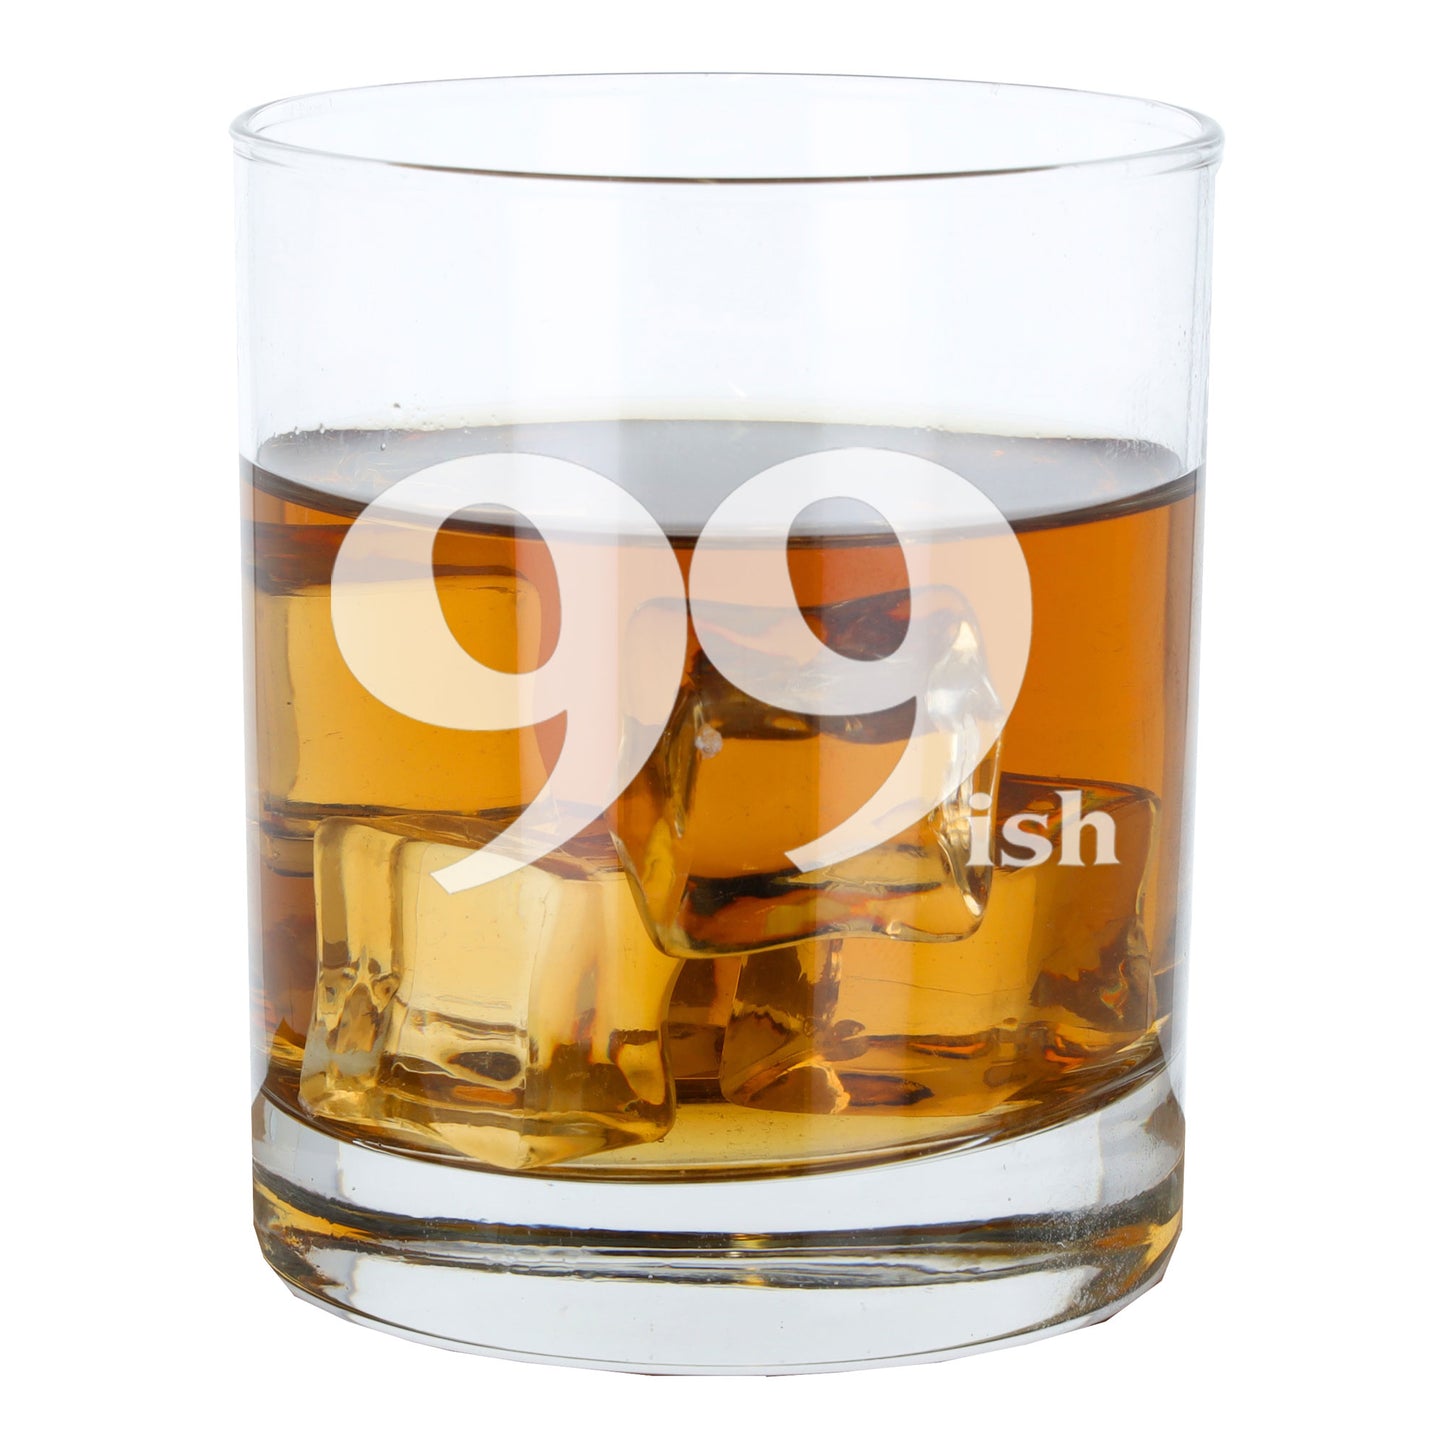 99ish Whisky Glass and/or Coaster Set  - Always Looking Good -   